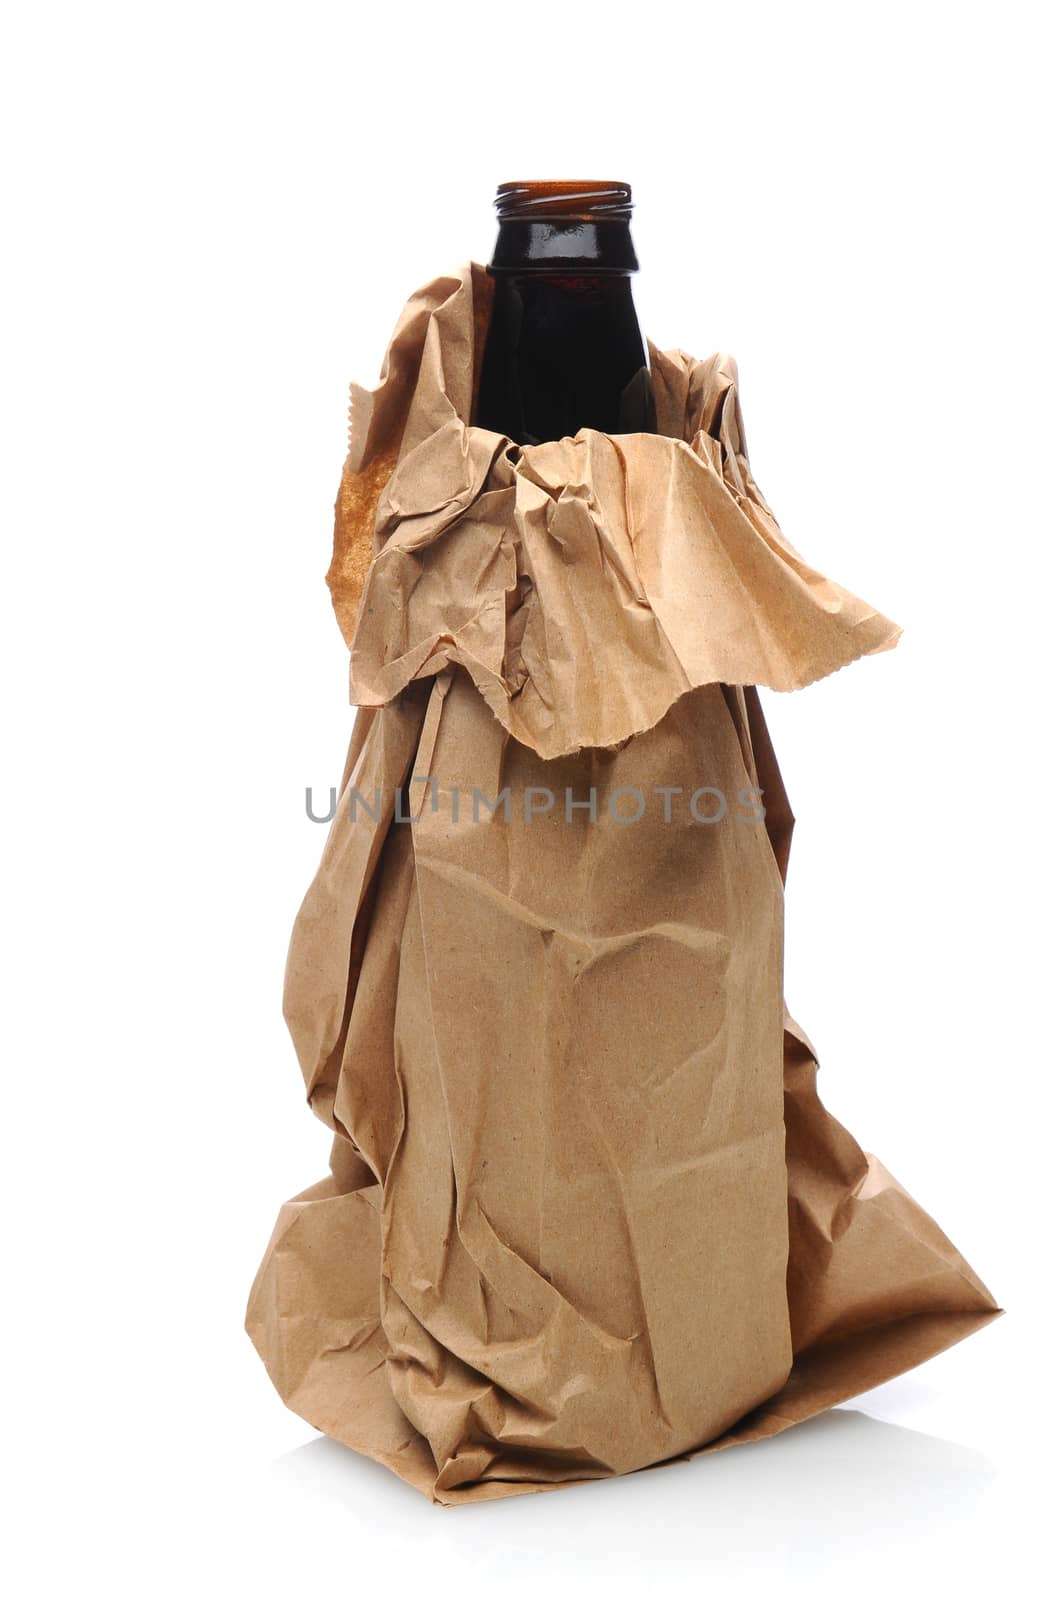 Closeup of a beer bottle inside a brown paper bag. Vertical format, isolated on white with reflection.